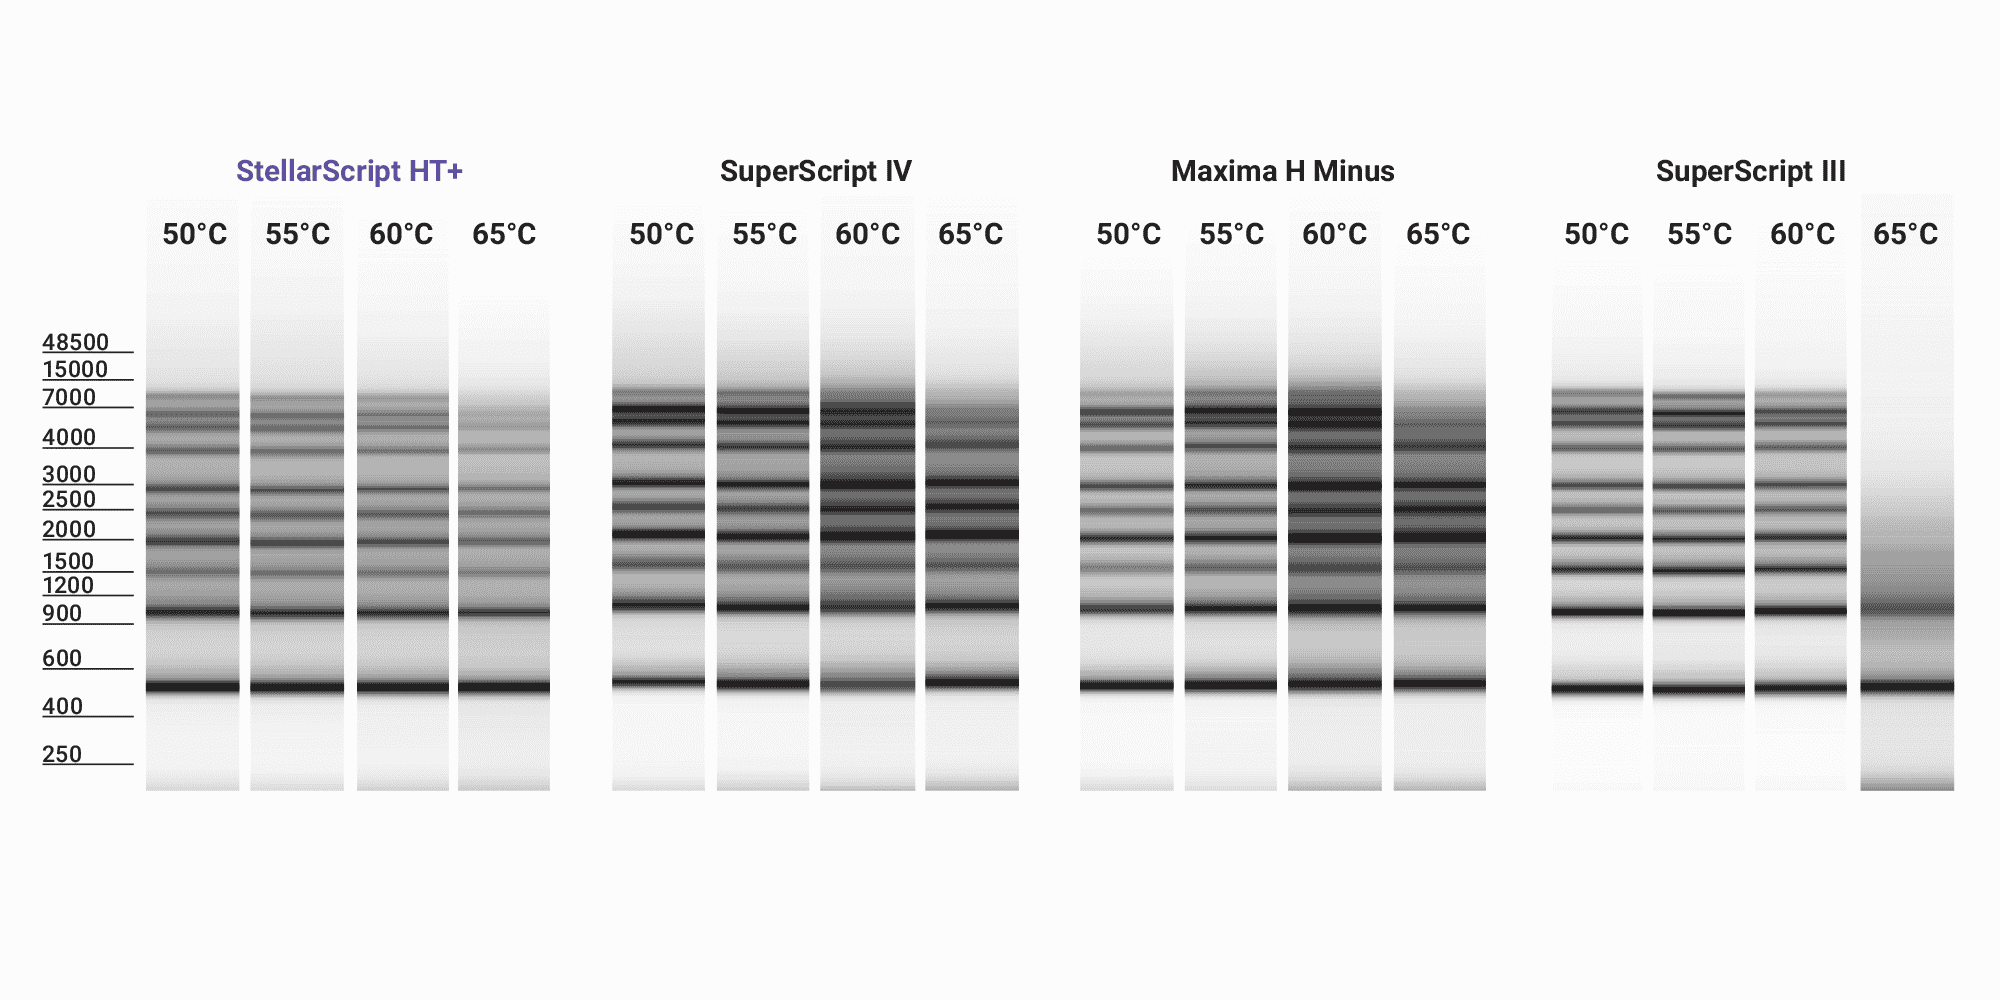 Figure 1C. Excellent performance at elevated temperatures. Watchmaker’s StellarScript HT+ and ThermoFisher Scientific’s SuperScript IV and Maxima H Minus were run in oligo-dT-primed first strand synthesis at 50°C, 55°C, 60°C or 65°C for 30 minutes using a 0.5 to 9 kb RNA ladder as template. All three enzymes have robust processivity up to 60°C.